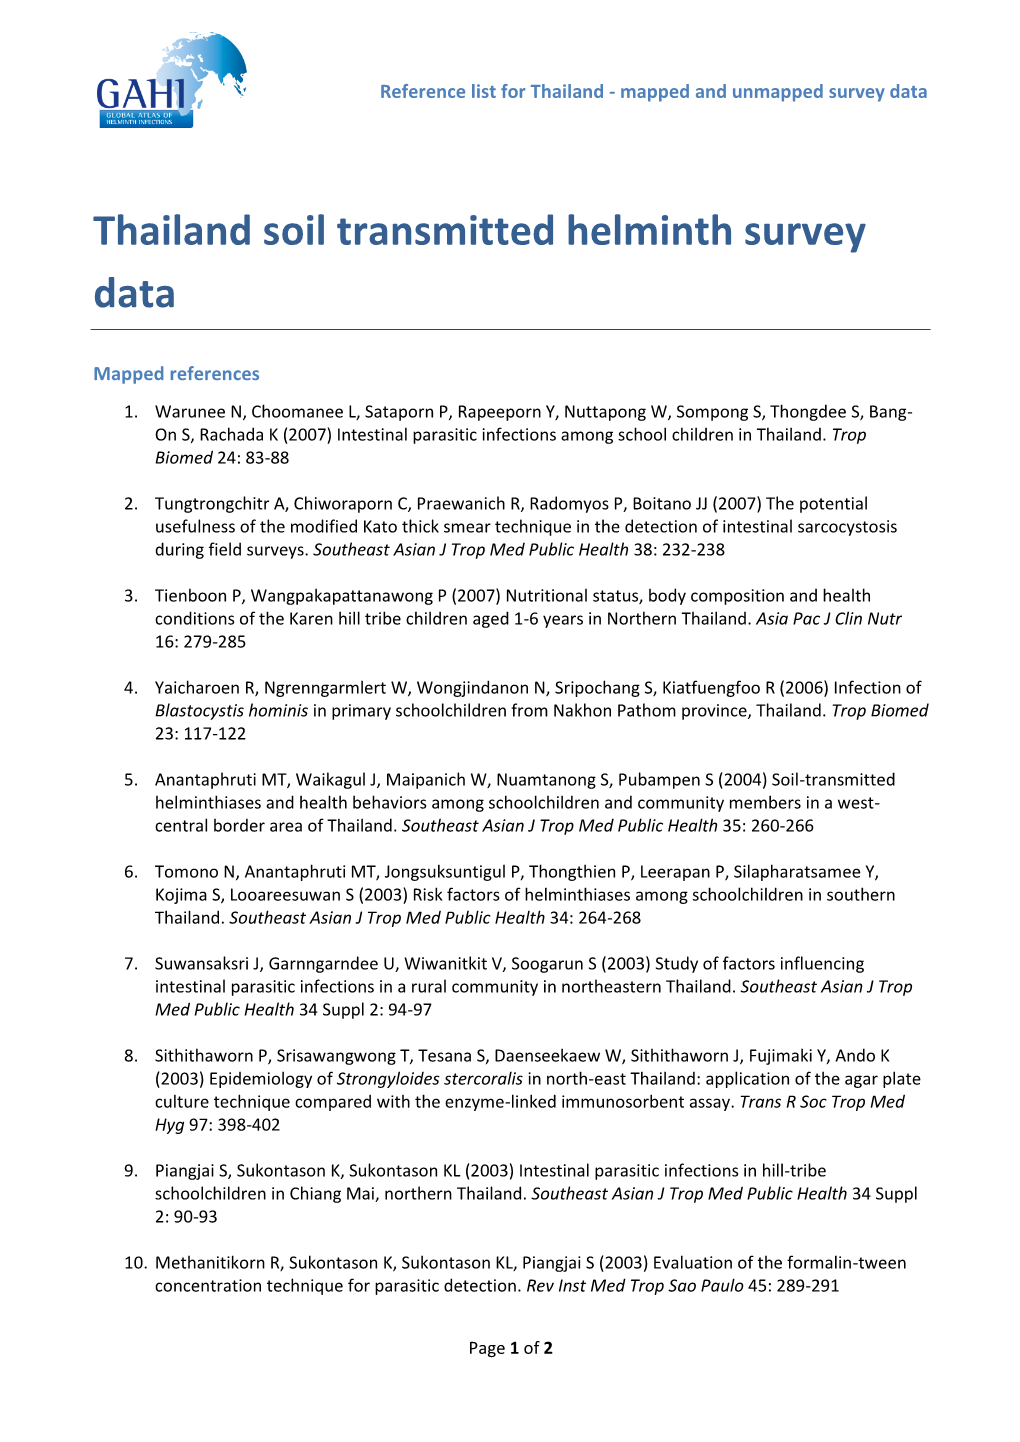 Thailand Soil Transmitted Helminth Survey Data